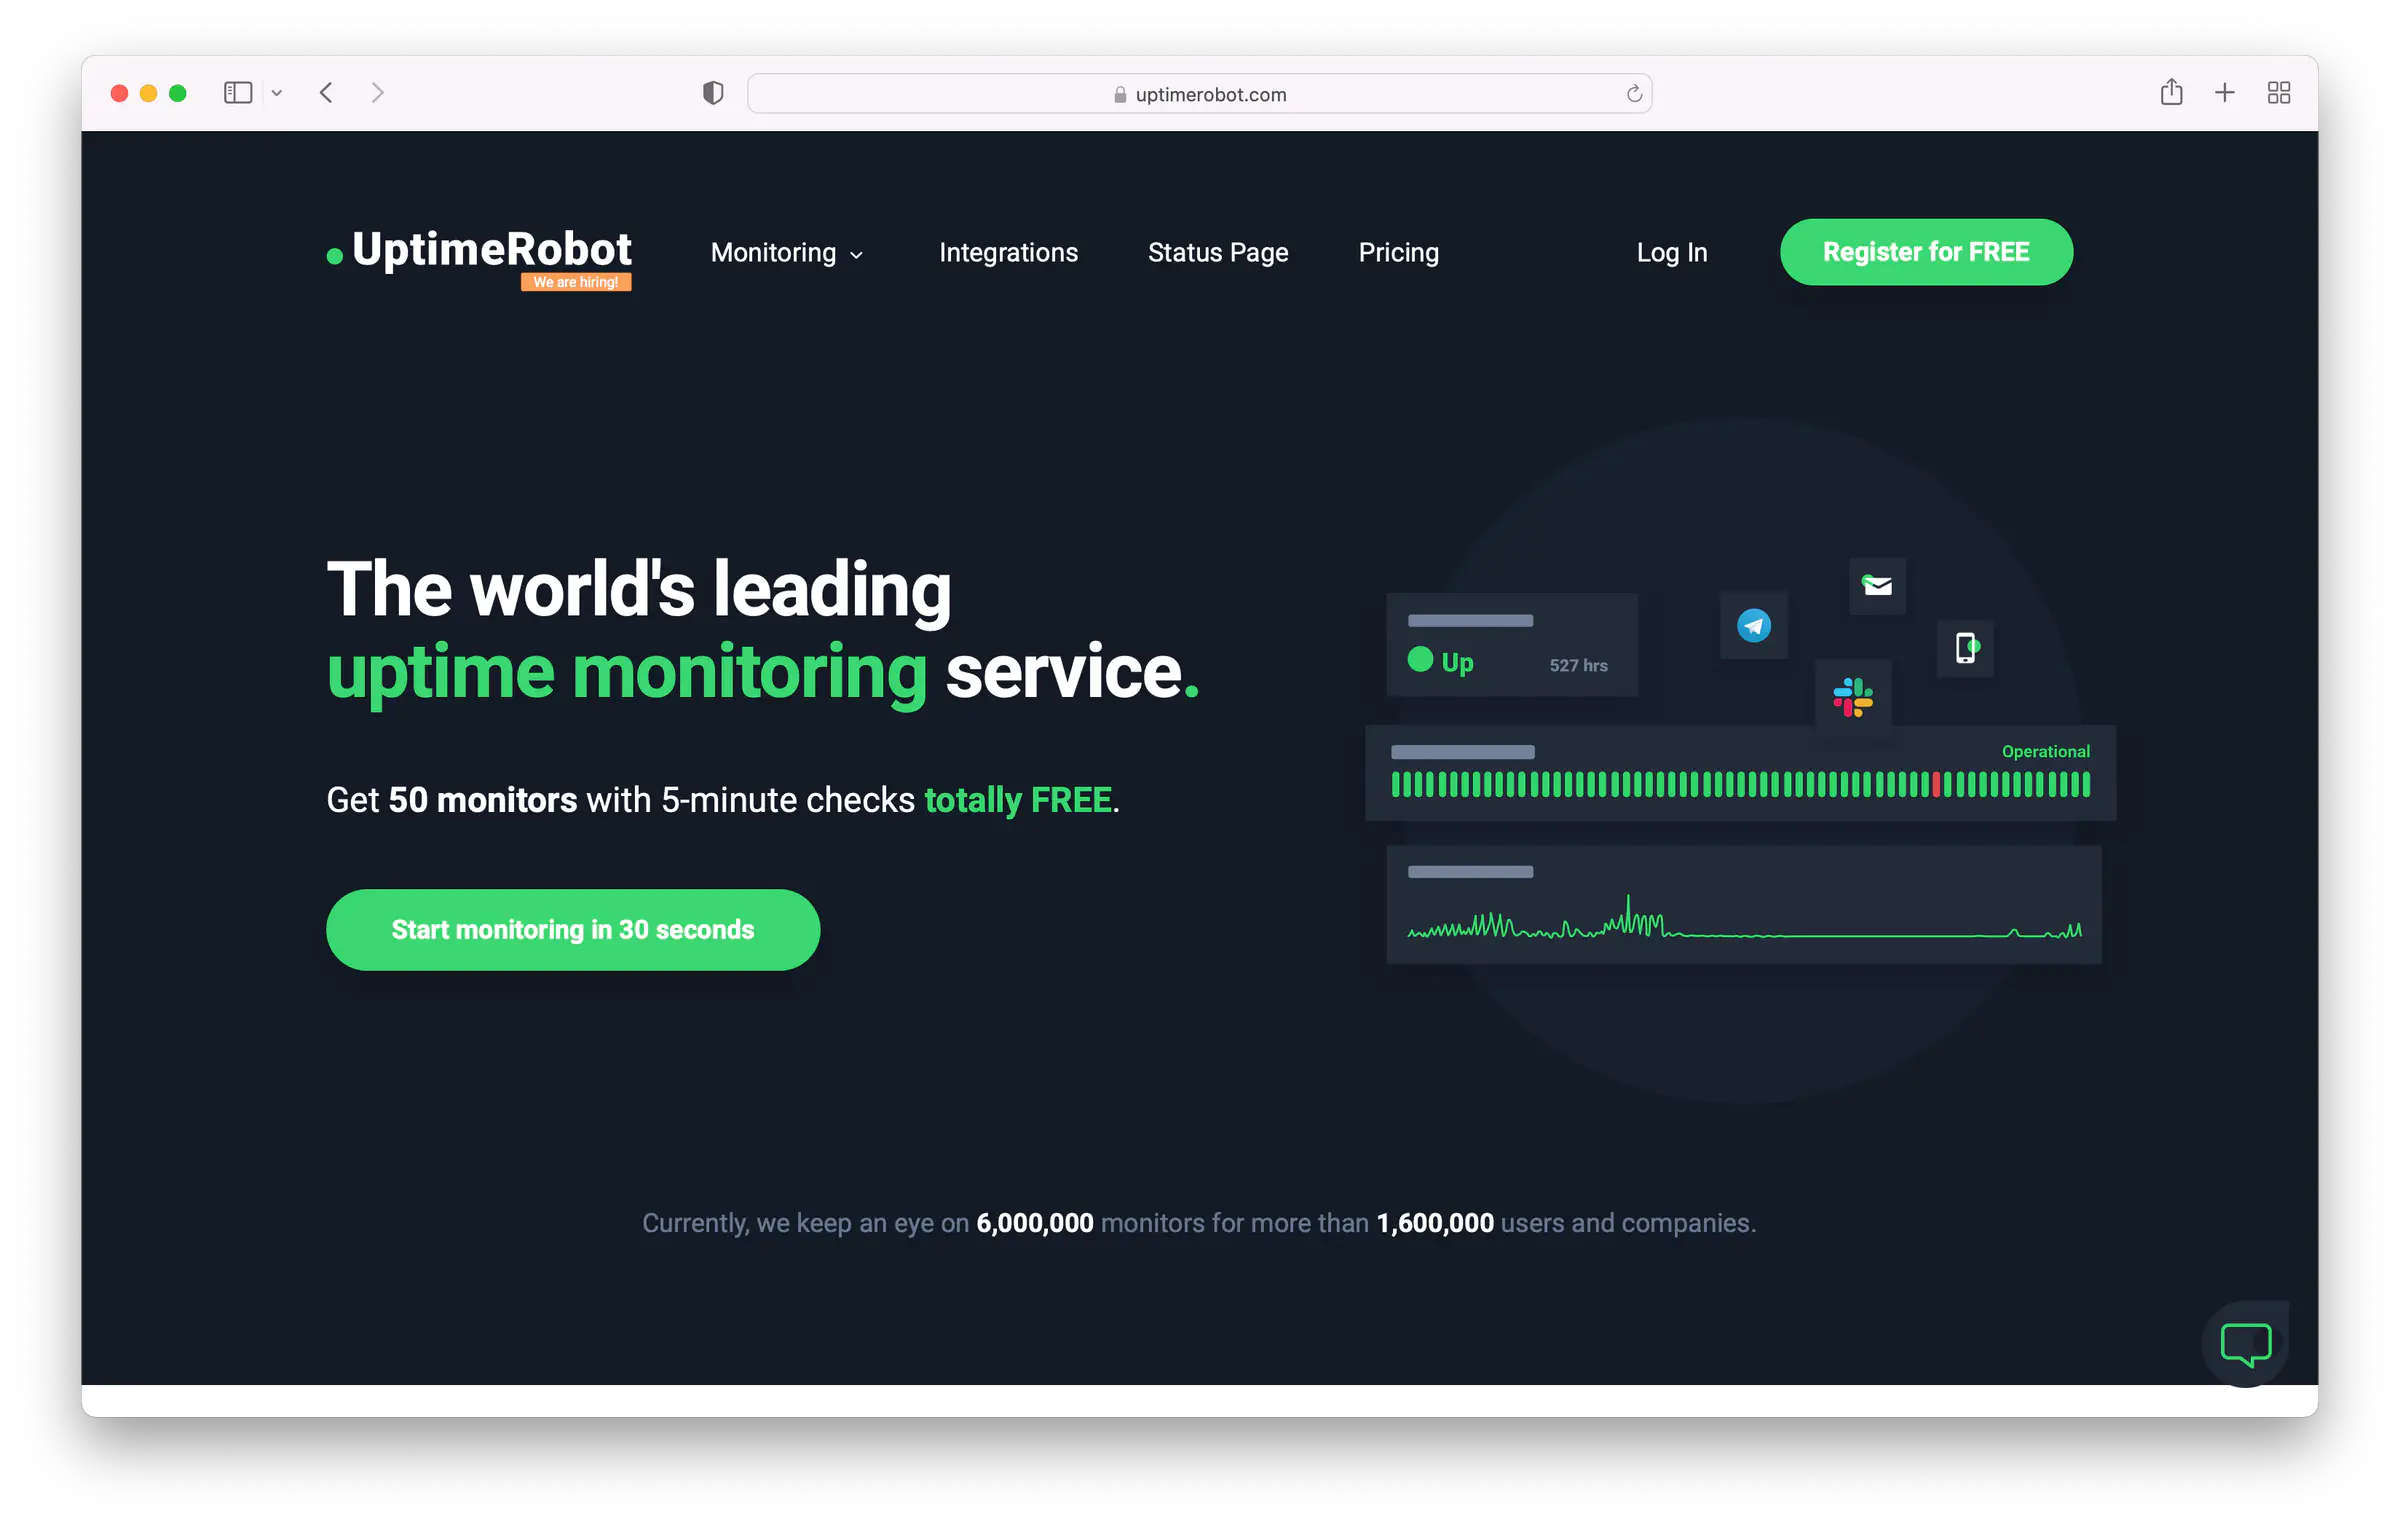 UptimeRobot Website Home Page (as of June 2022)